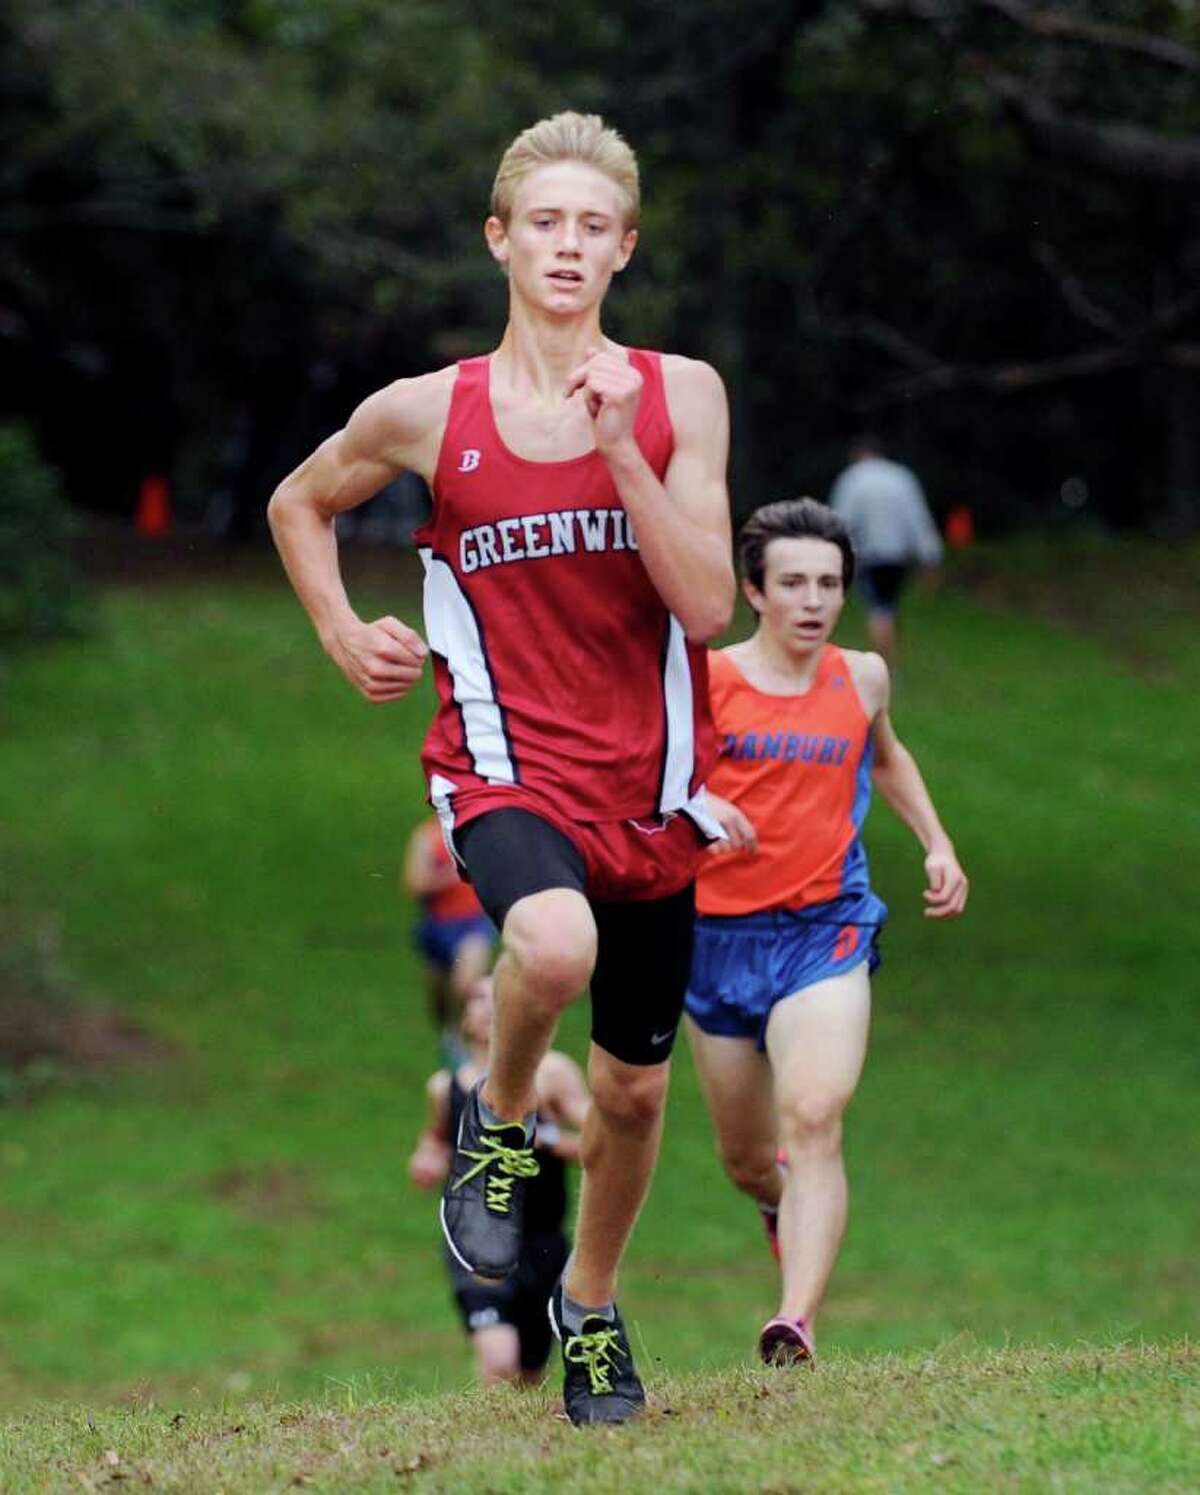 Mark Jarombek of Greenwich High School during High School cross country meet at Greenwich Point, Tuesday afternoon, Oct. 4, 2011.